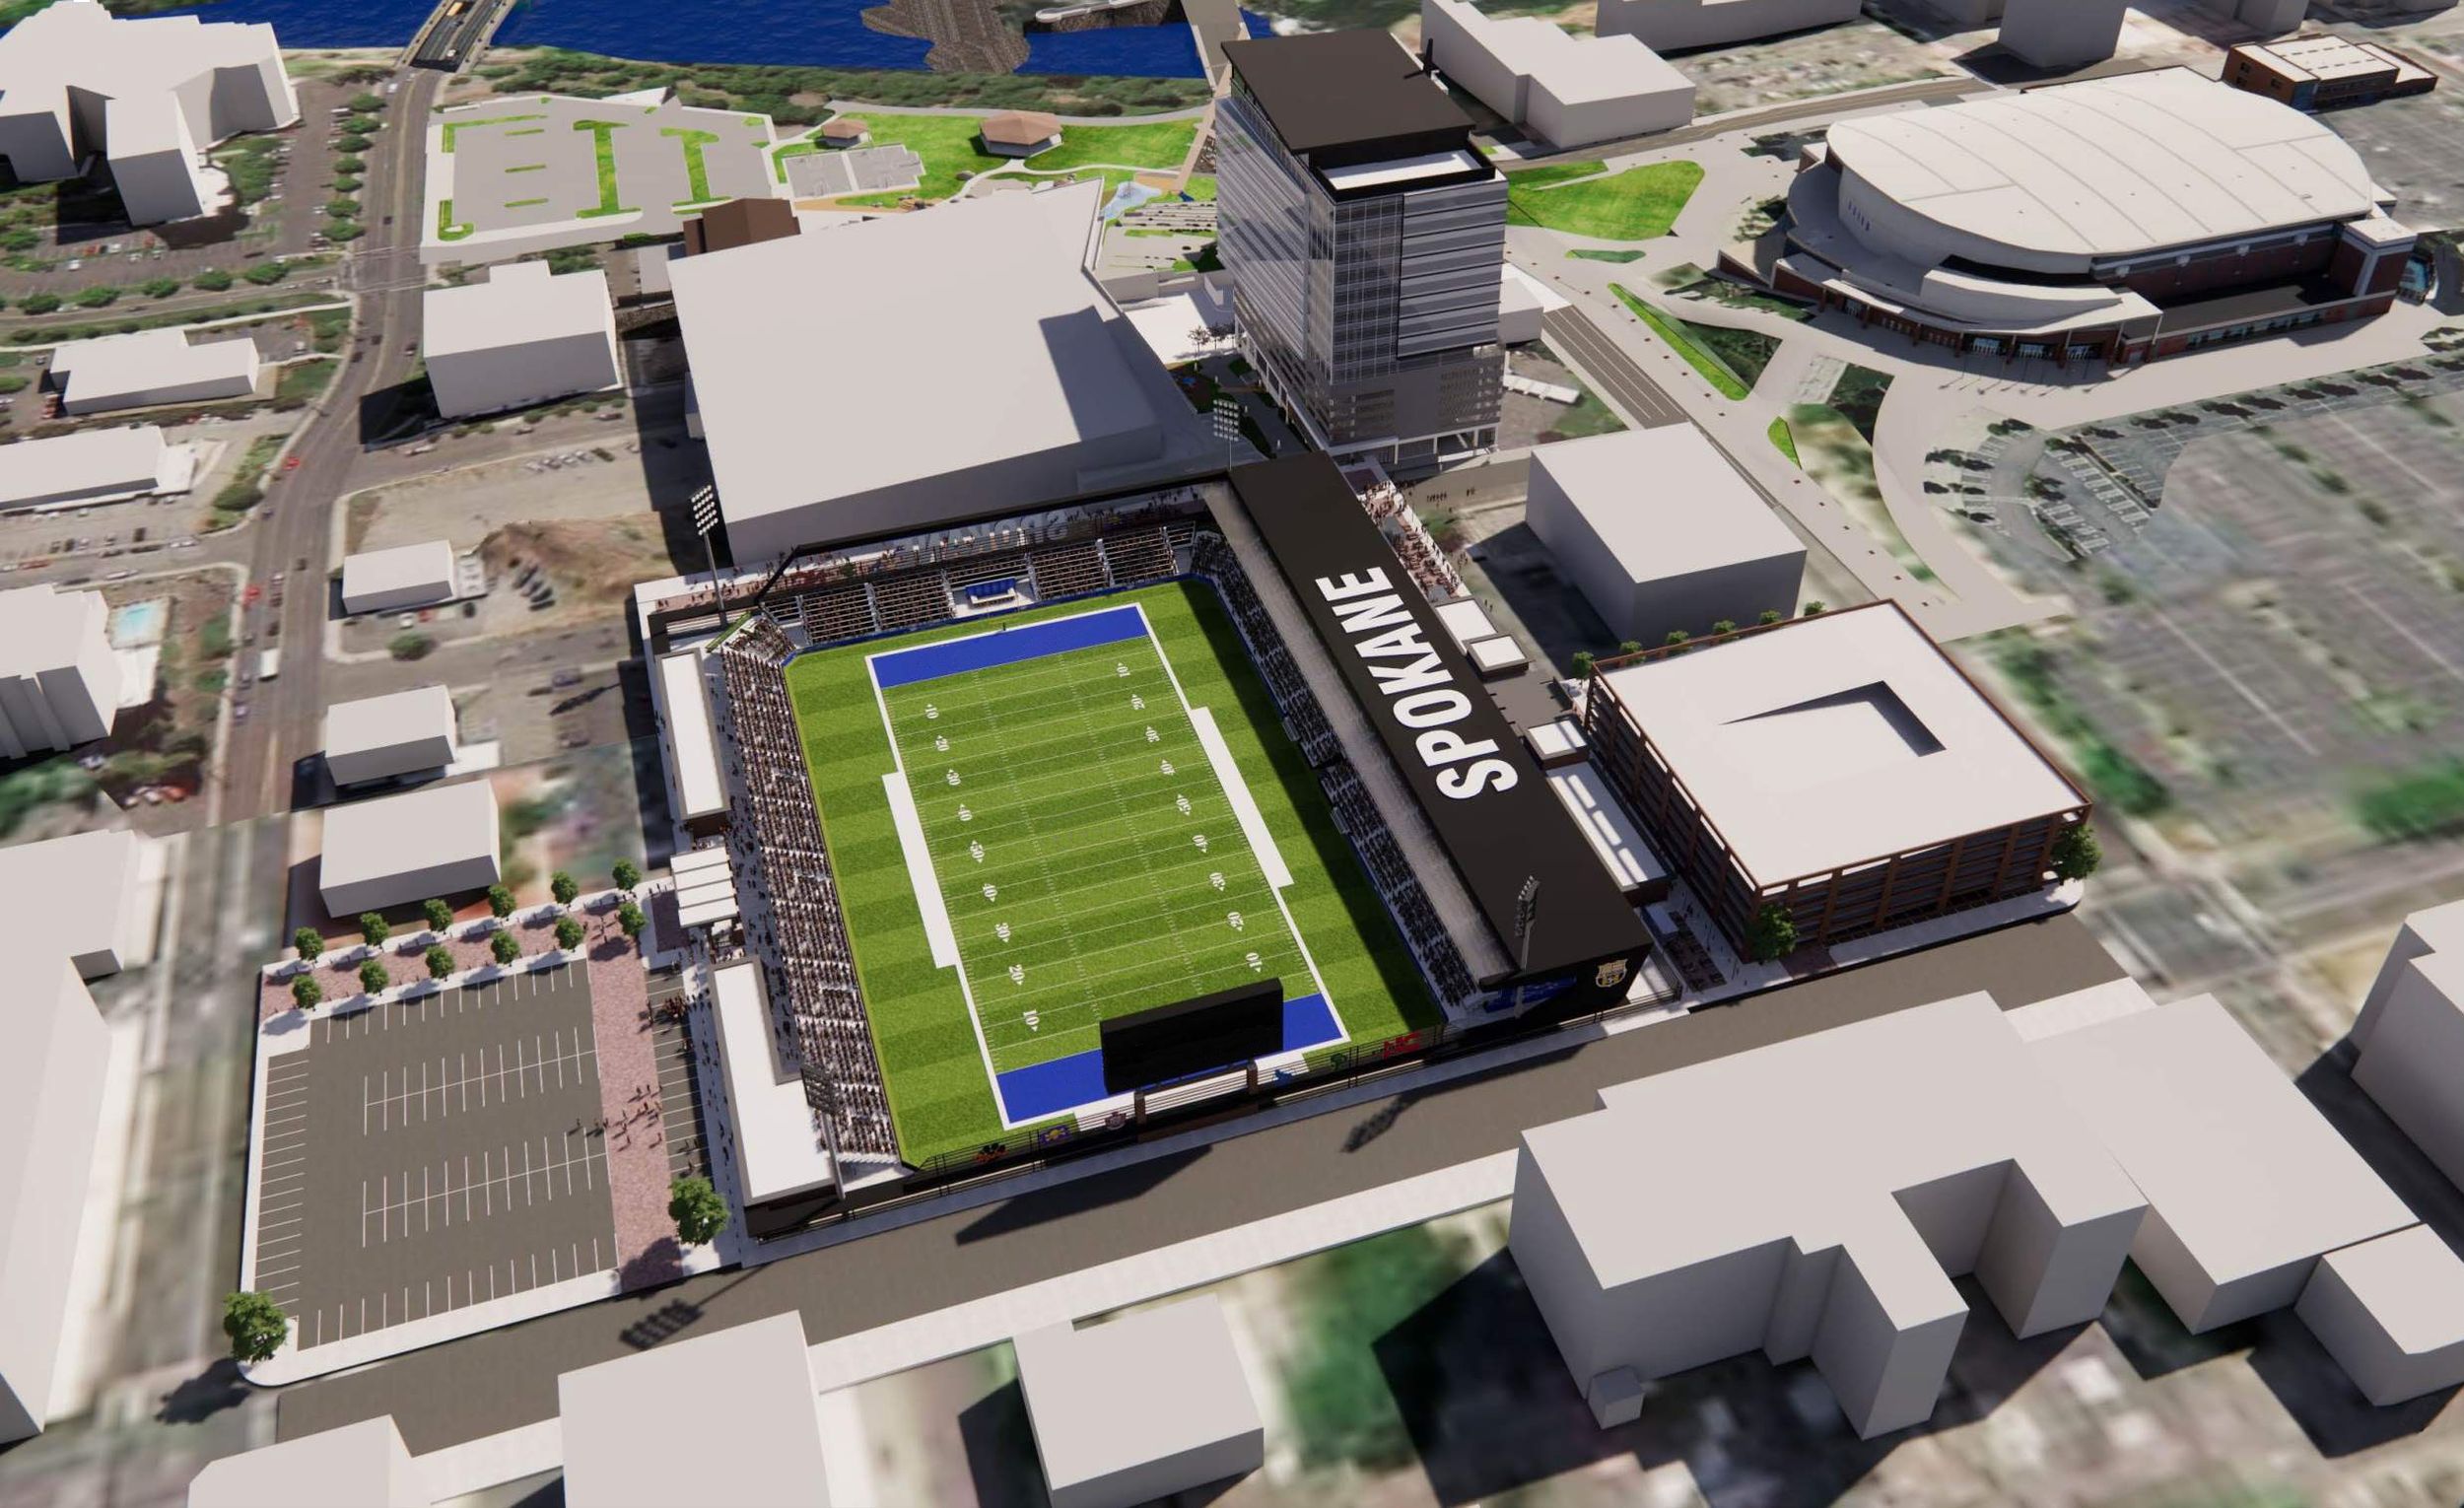 Five weeks after downtown Spokane stadium gets approval, plans